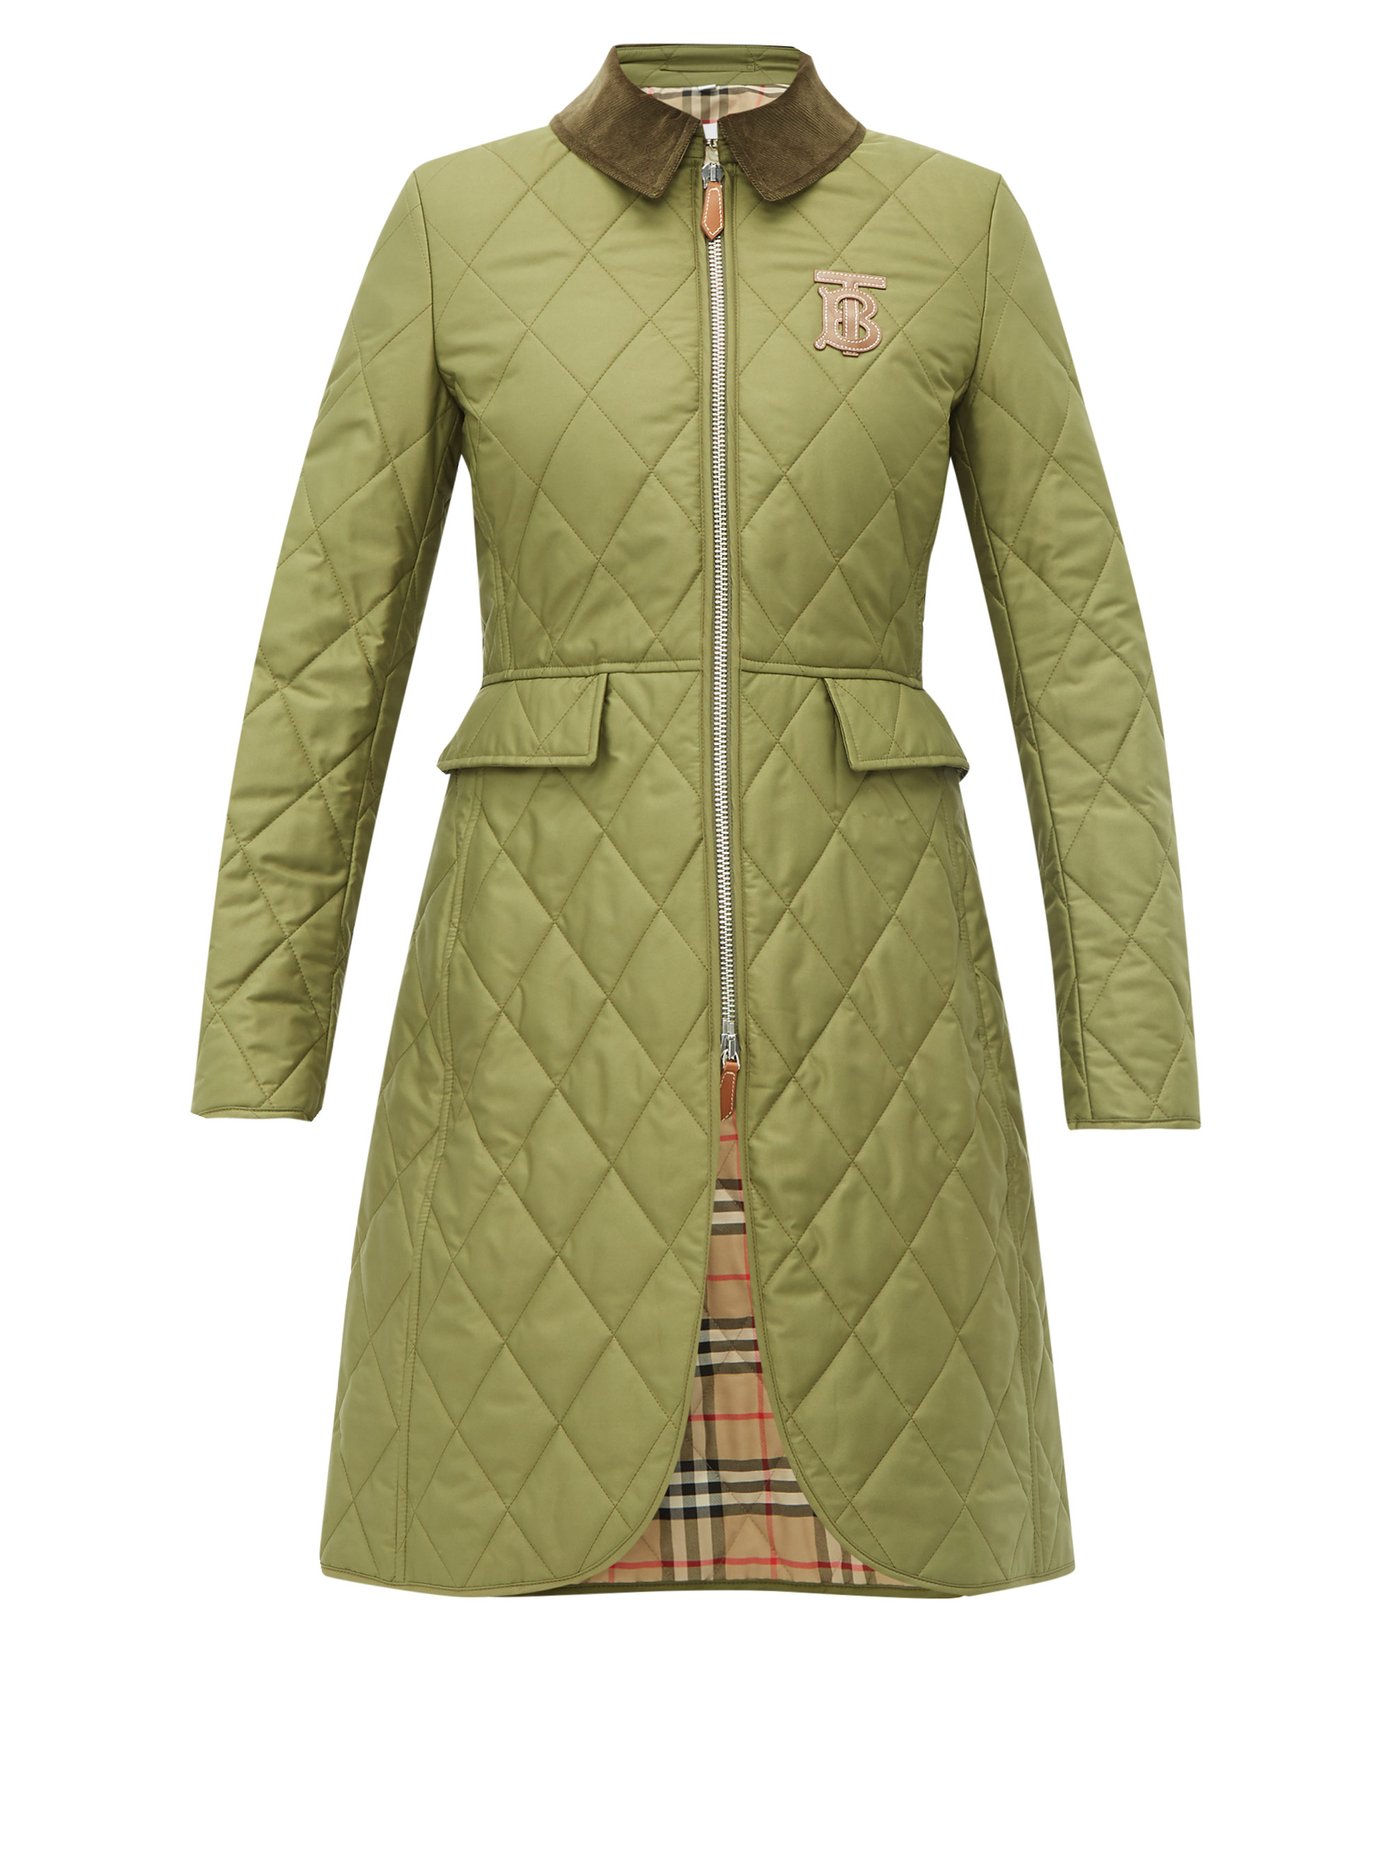 burberry green quilted jacket